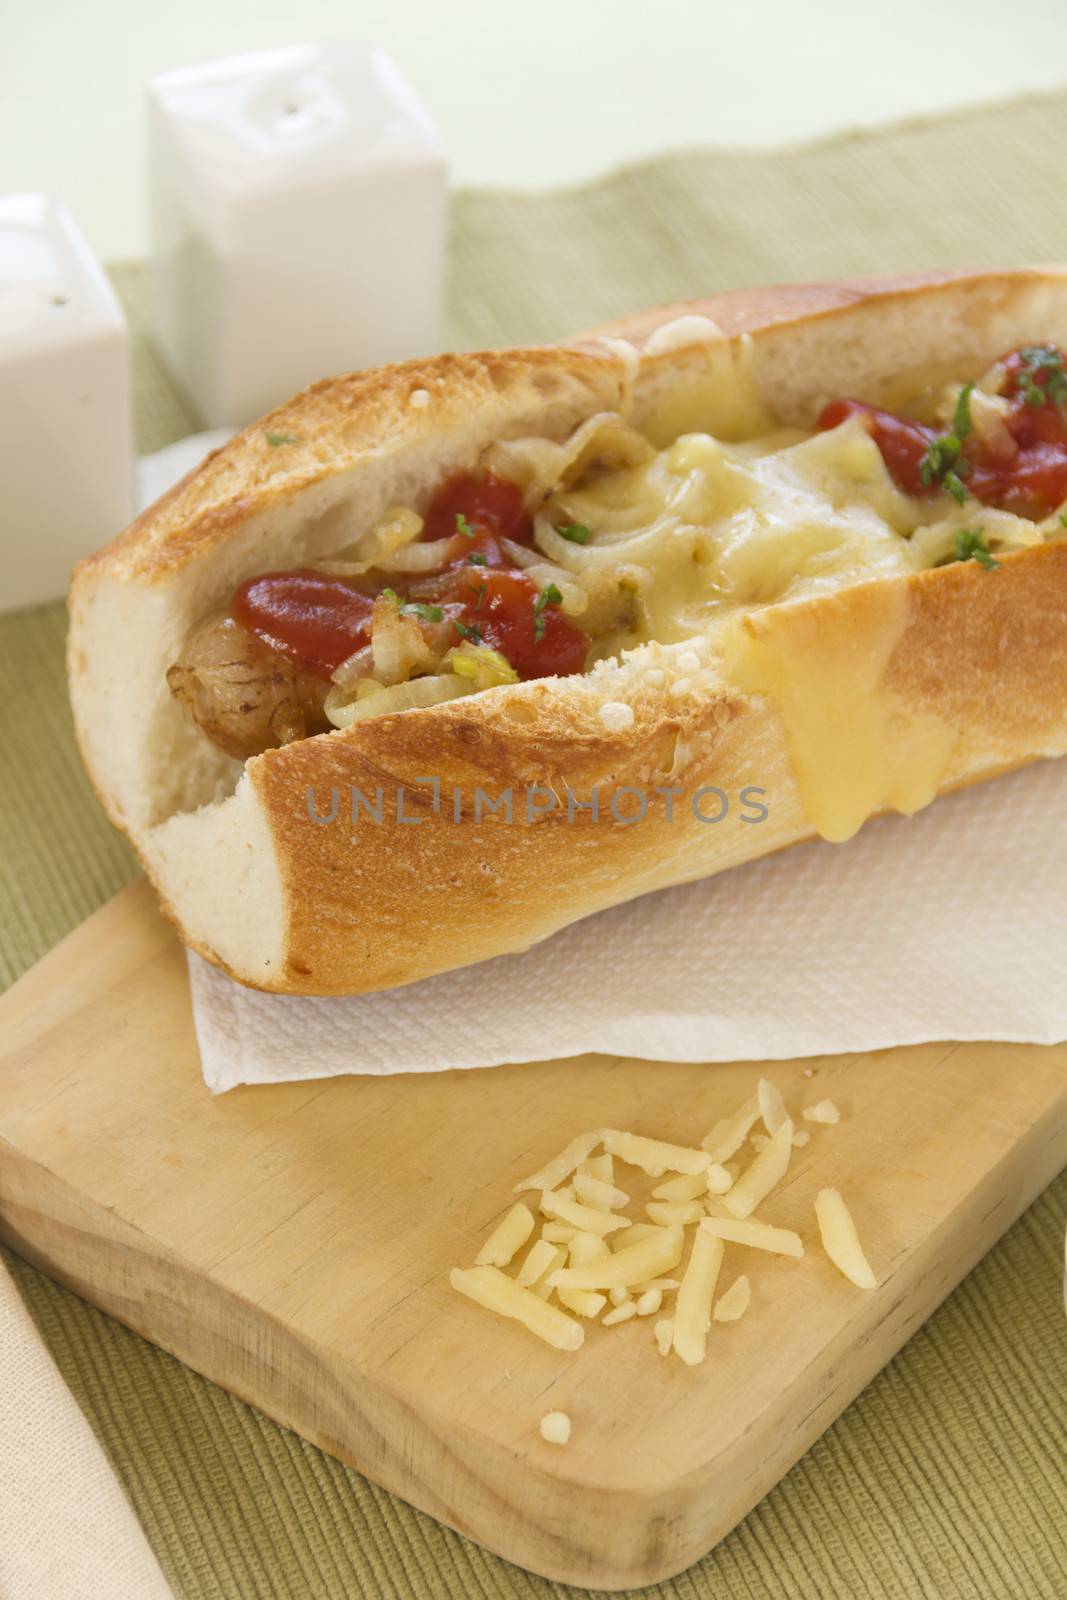 Melted Cheese Hot Dog by jabiru